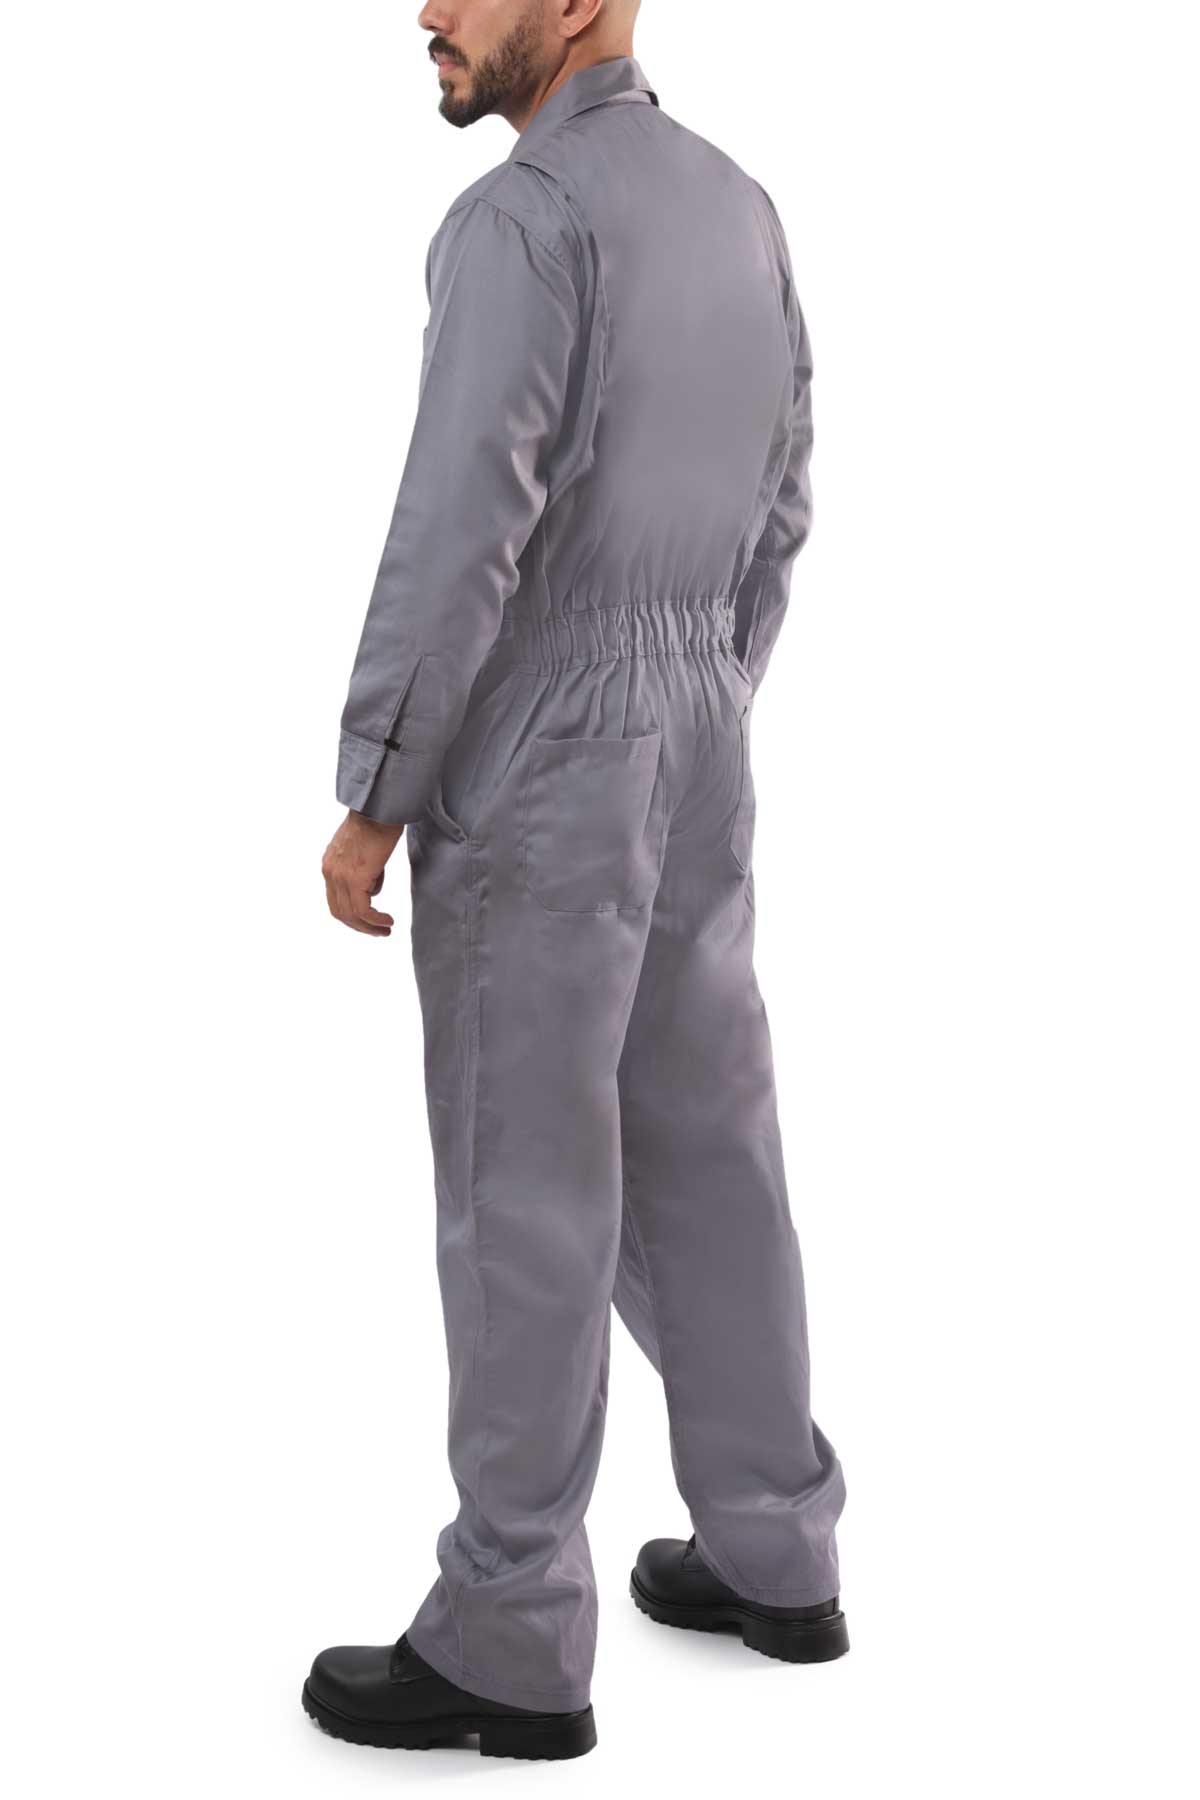 Off-White c/o Virgil Abloh Grey Workwear Jumpsuit in Gray for Men | Lyst